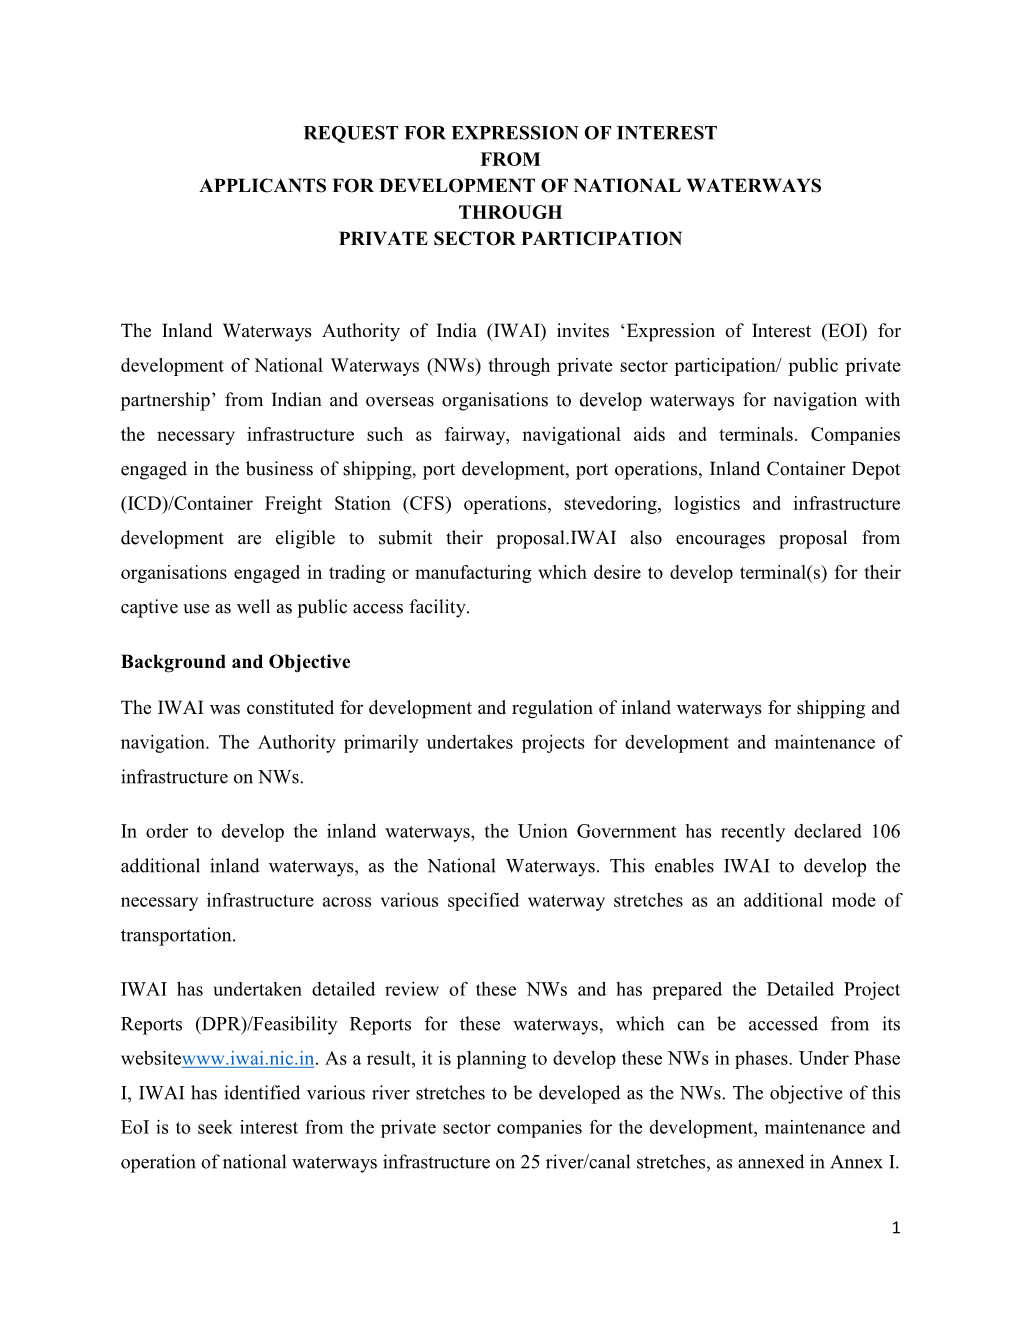 Request for Expression of Interest from Applicants for Development of National Waterways Through Private Sector Participation